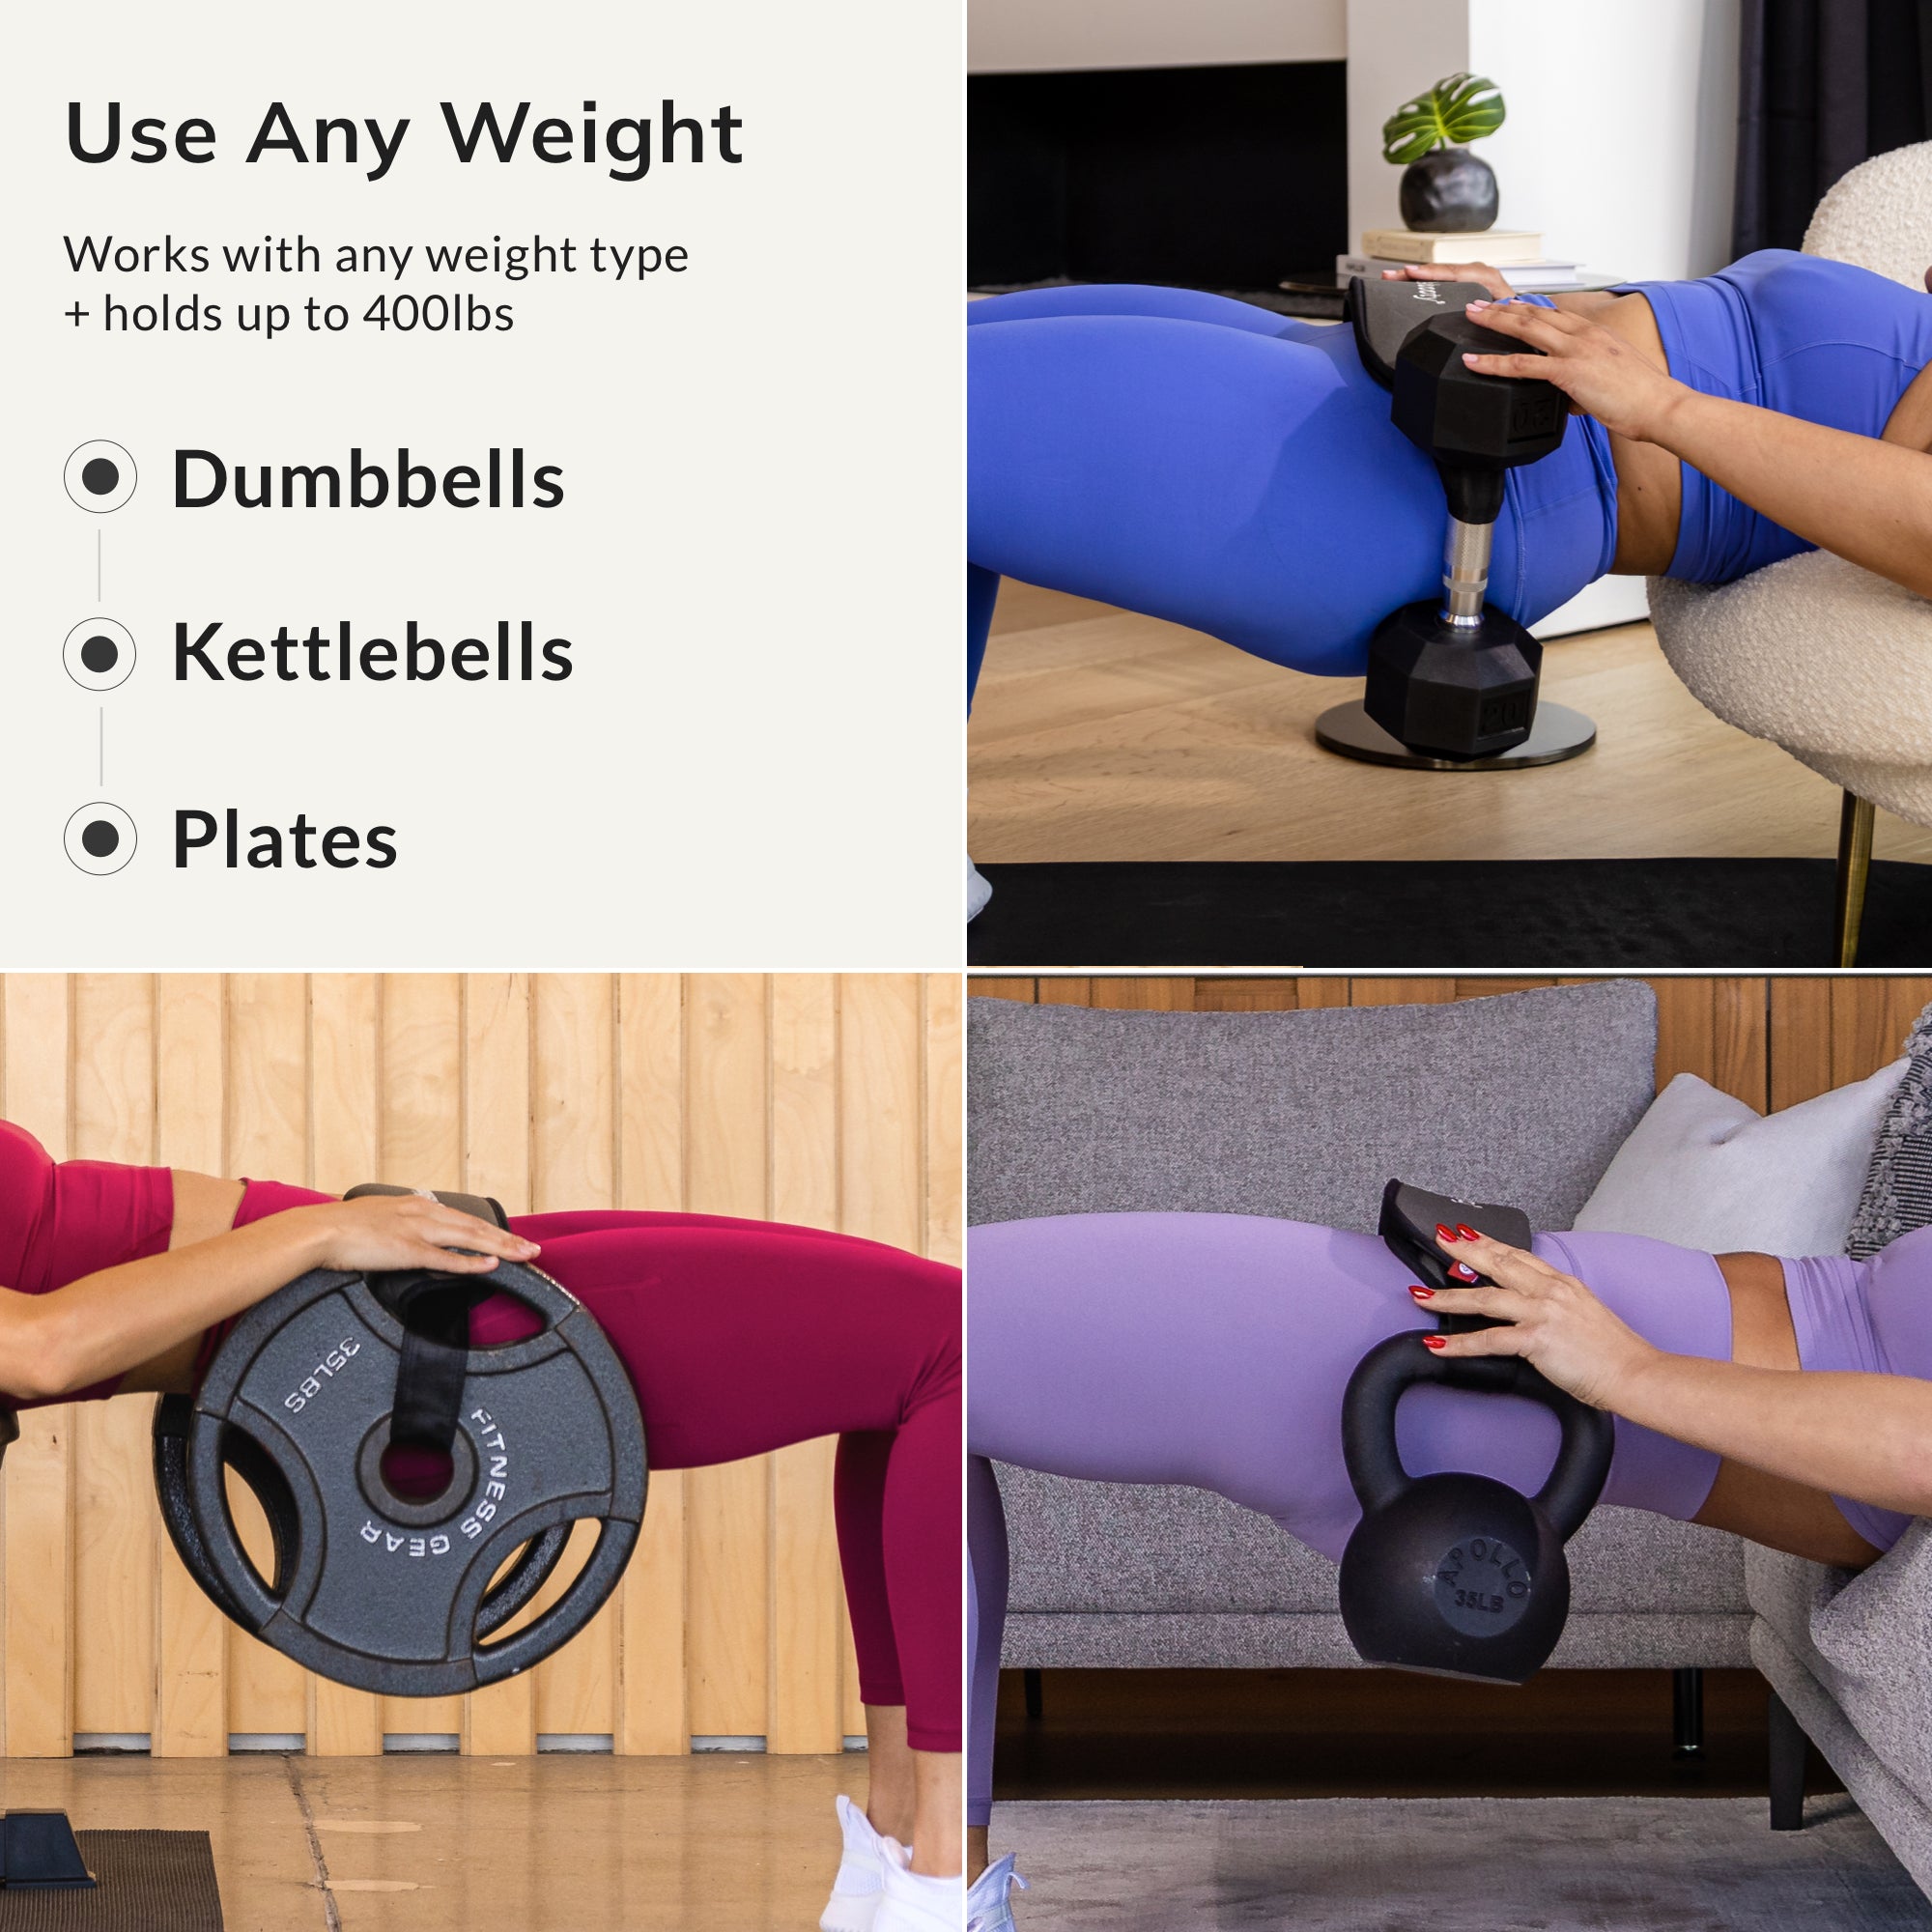 Bellabooty Exercise Hip Thrust Belt, Easy to Use with Dumbbells,  Kettlebells, or Plates, Slip-Resistant Padding that Protects Your Hips for  the Gym